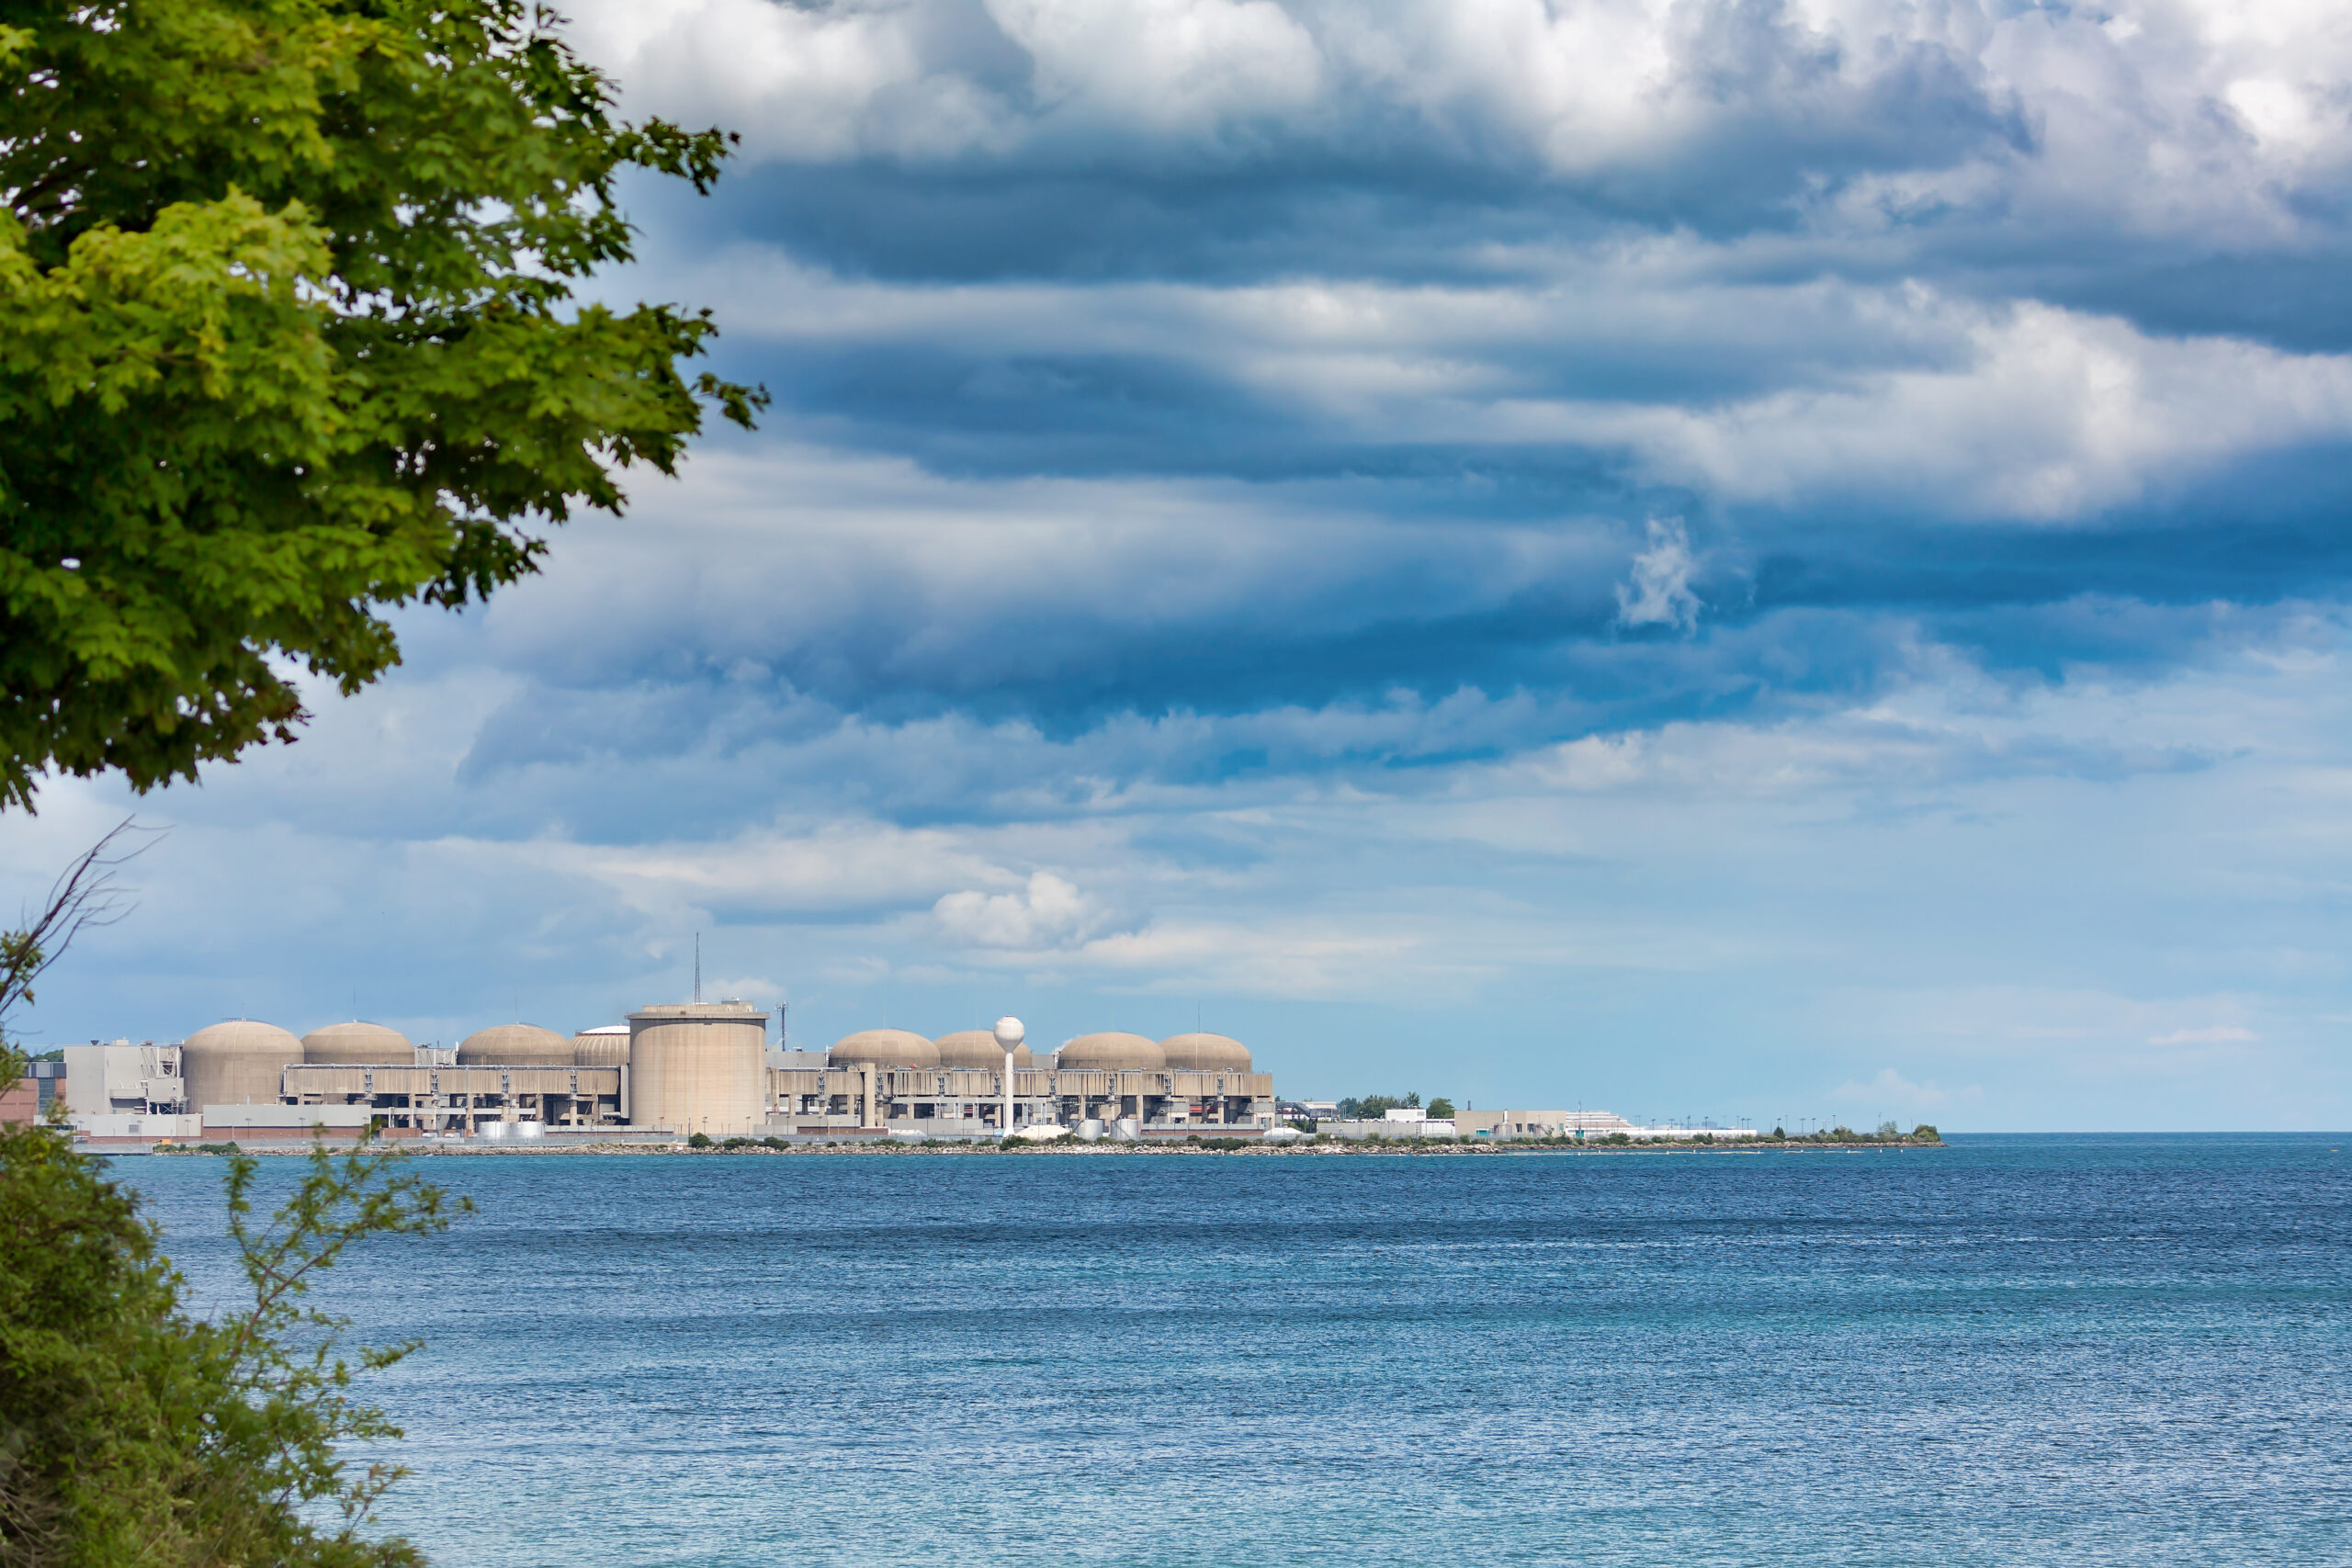 Pickering Nuclear Generating Station visible across a body of water